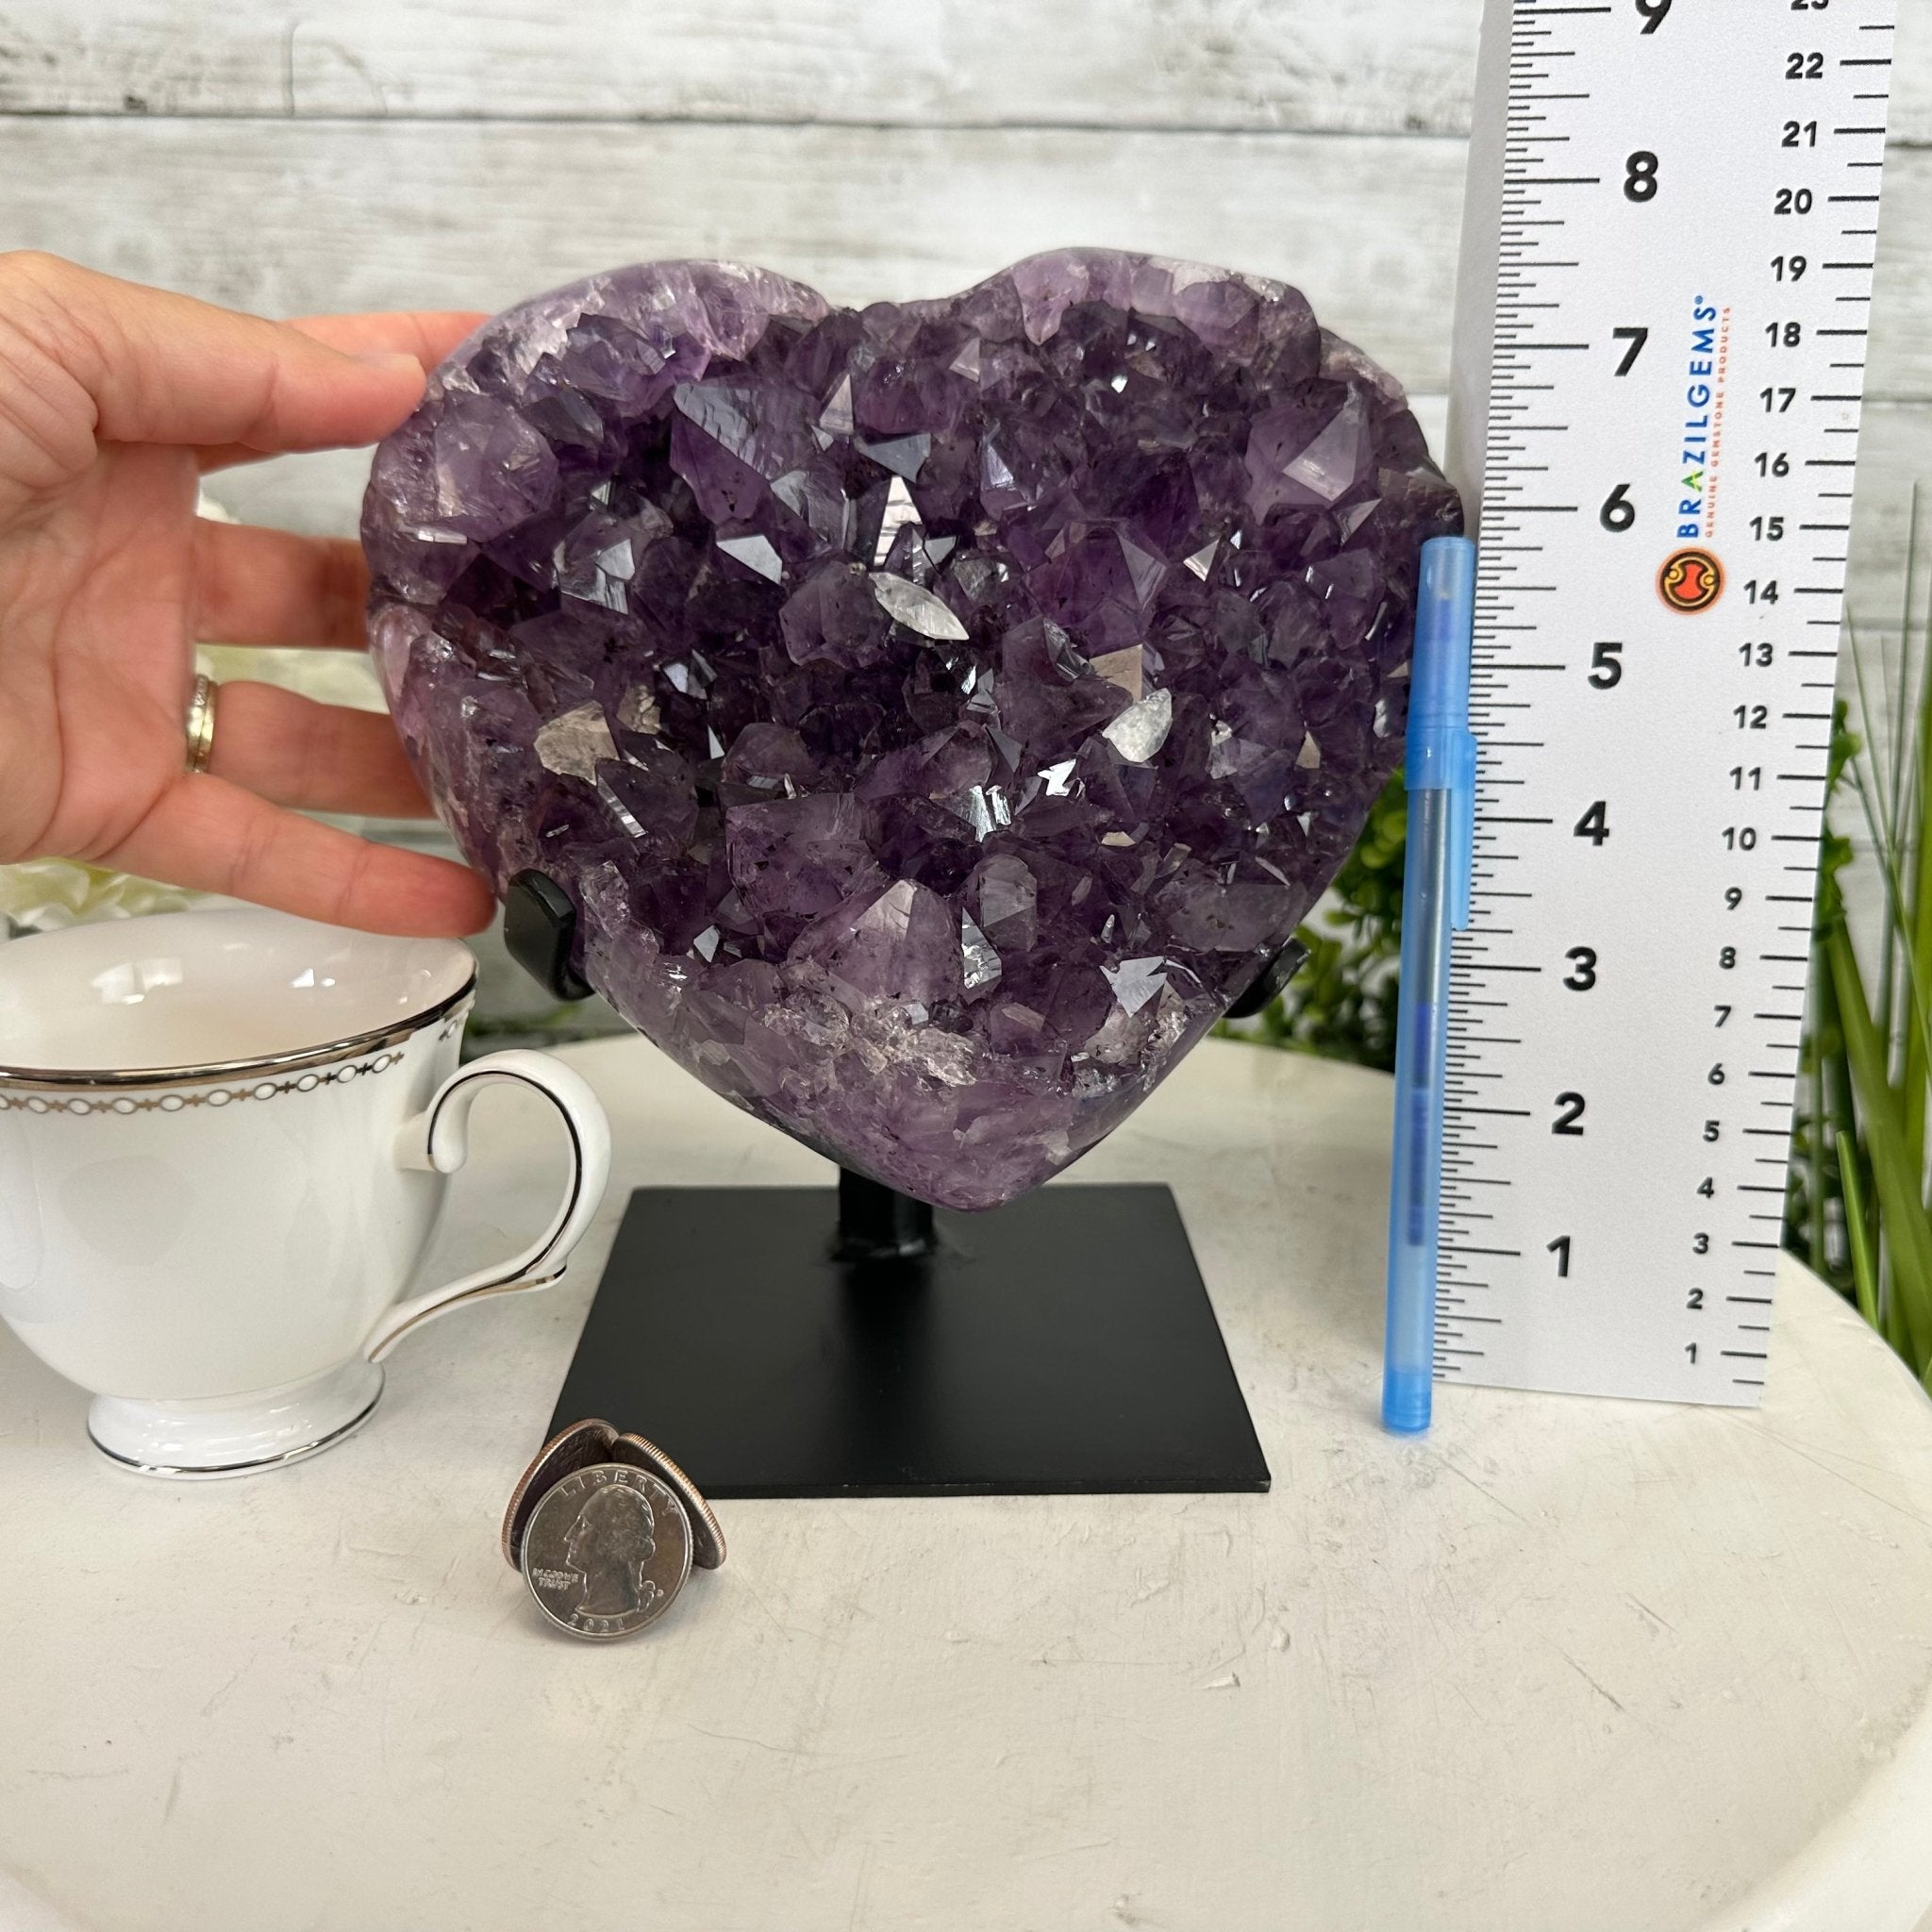 Extra Quality Amethyst Heart Geode w/ metal stand, 7.1 lbs & 8" Tall #5463-0292 - Brazil GemsBrazil GemsExtra Quality Amethyst Heart Geode w/ metal stand, 7.1 lbs & 8" Tall #5463-0292Hearts5463-0292